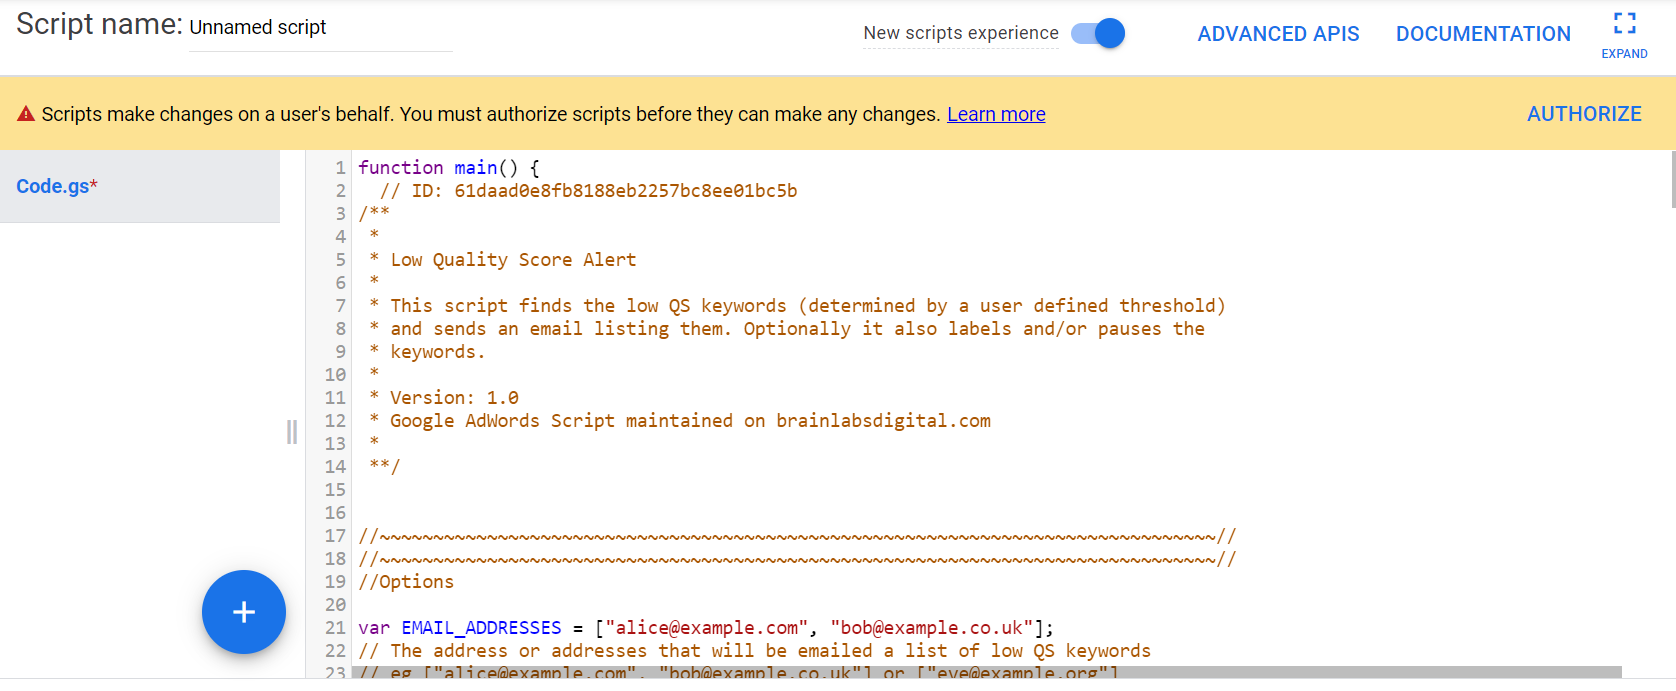 Google Ads new scripts experience.